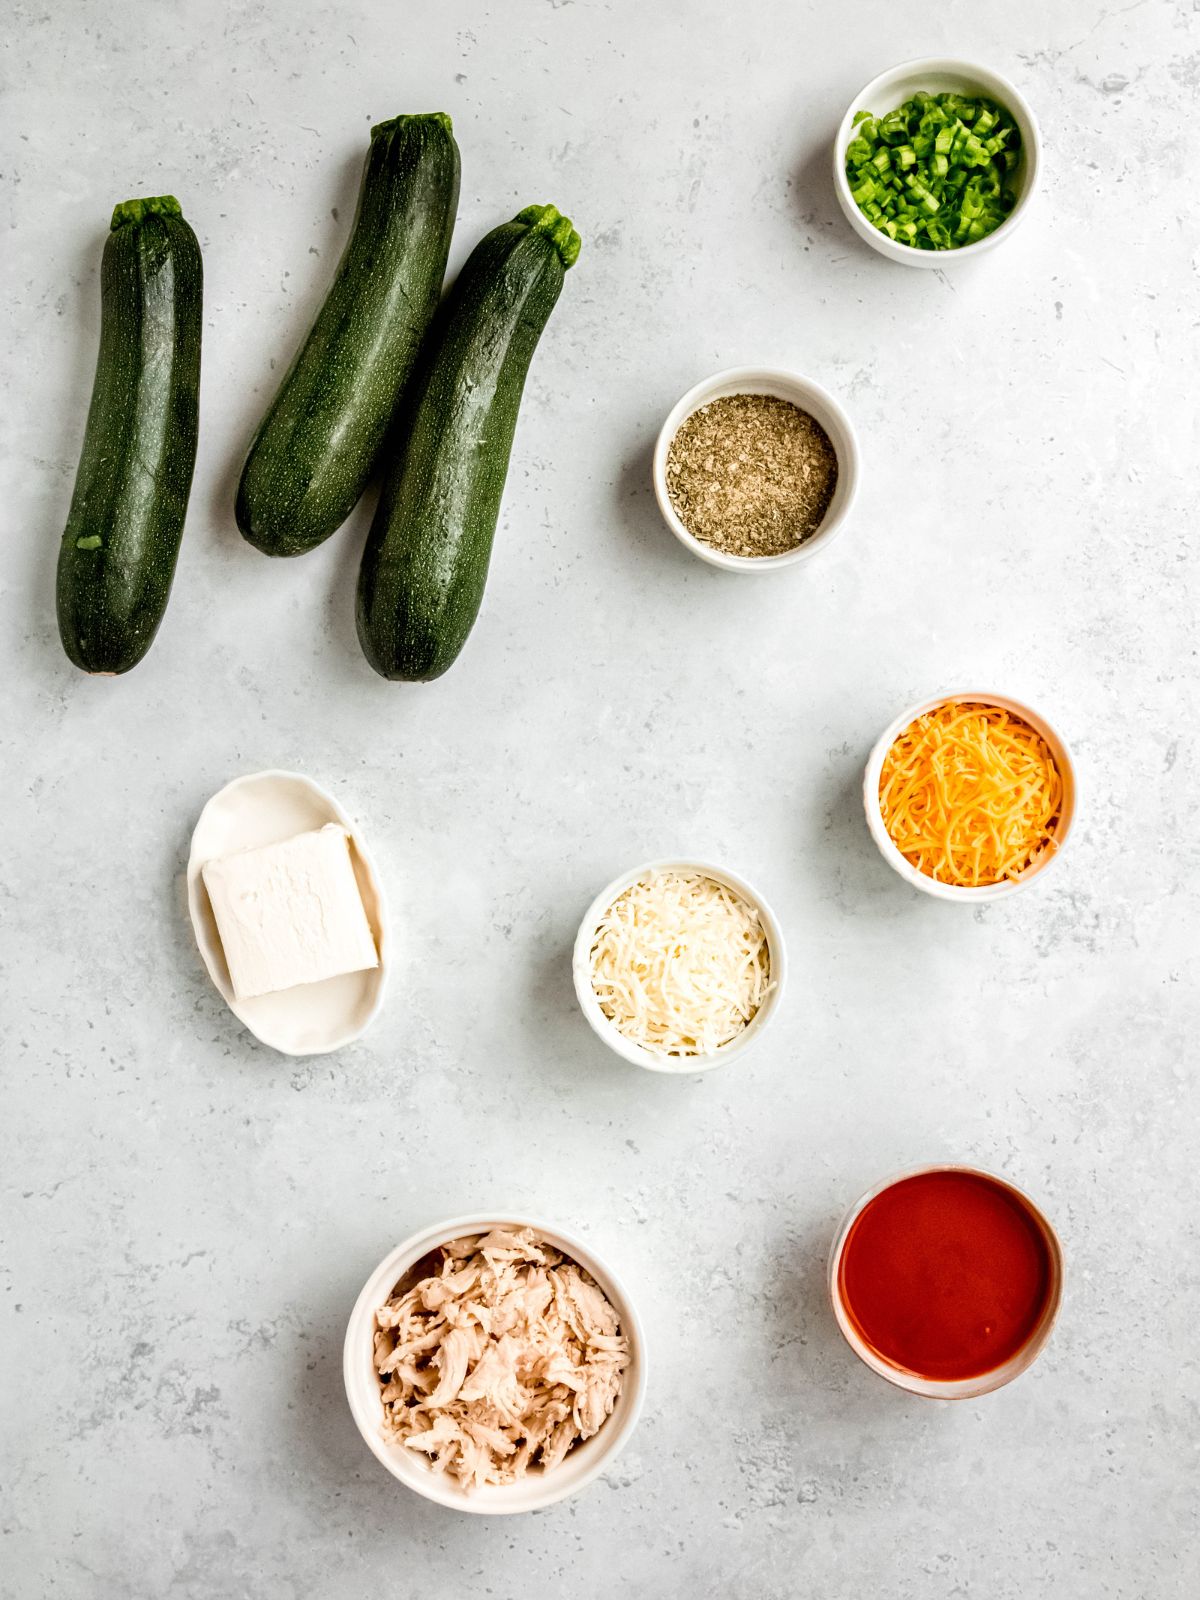 All of the ingredients for buffalo chicken zucchini boats.